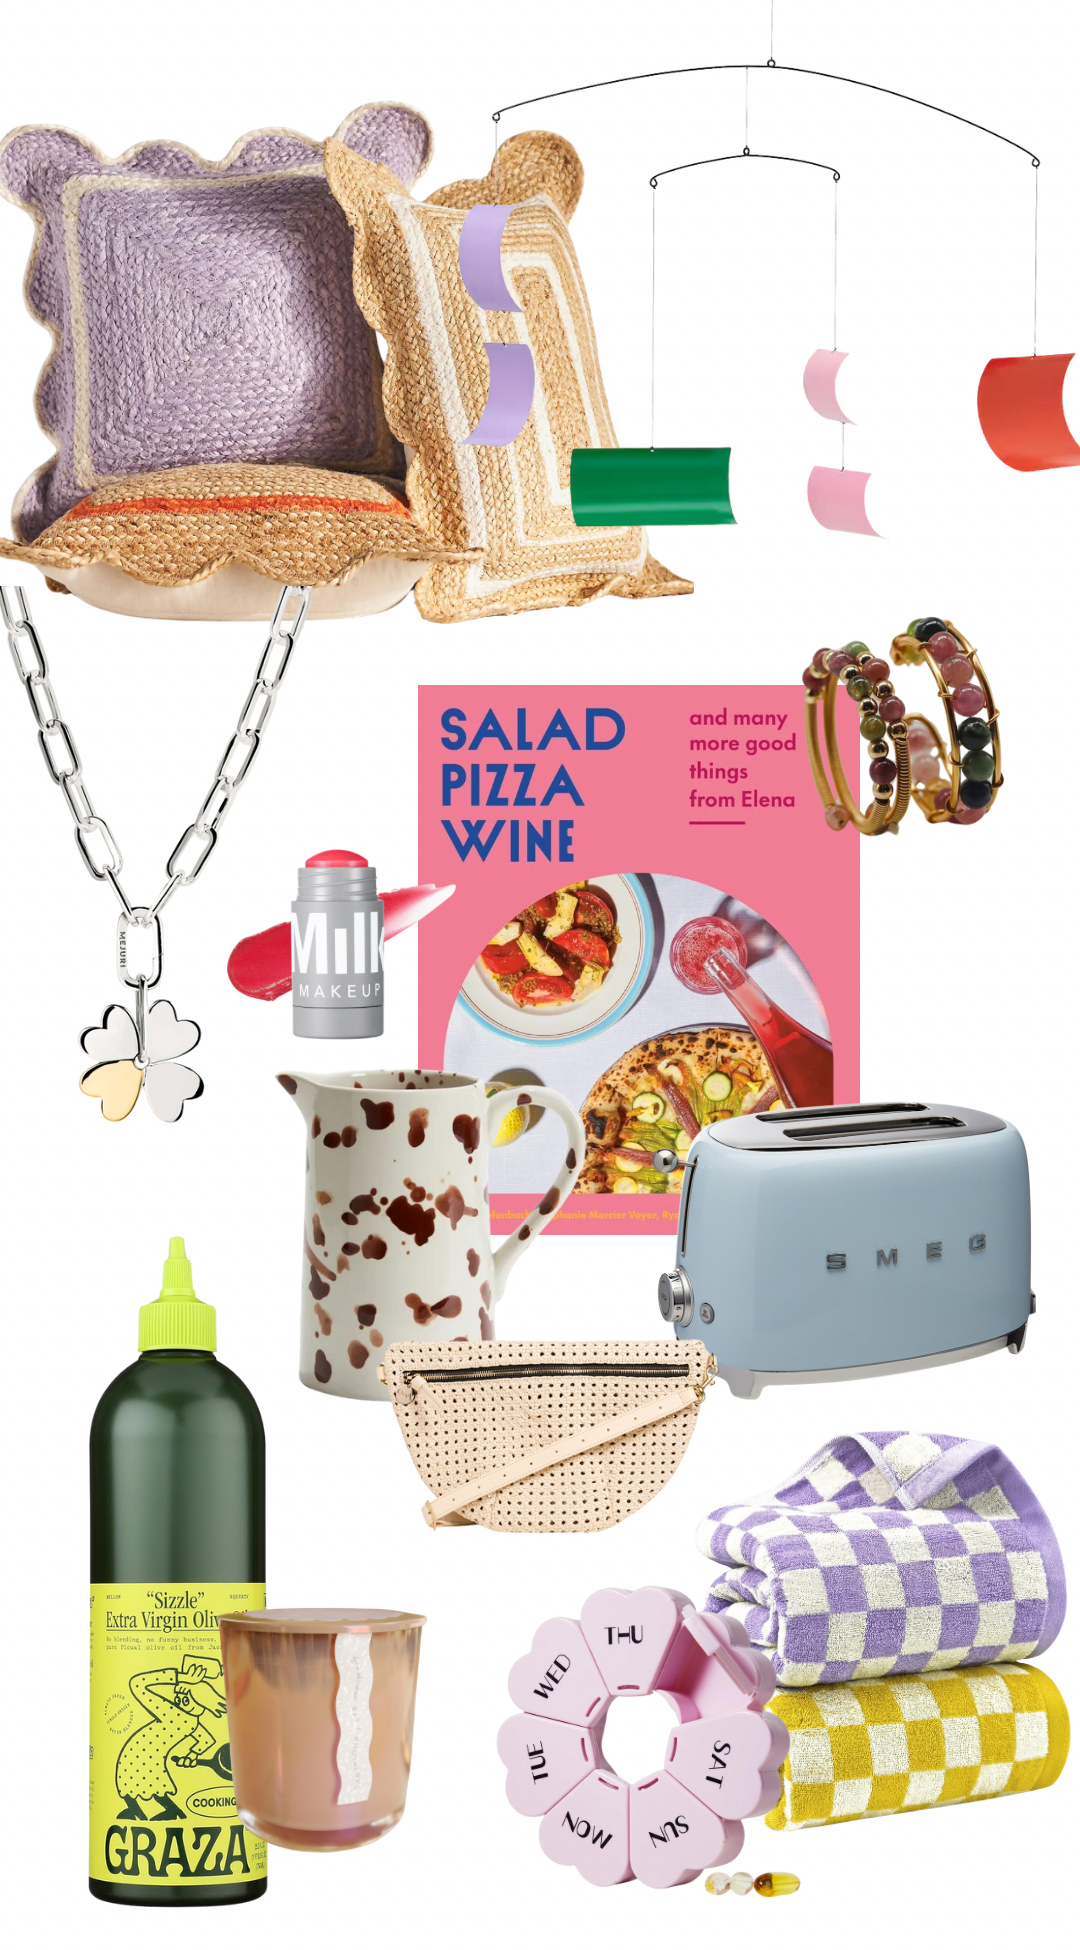 Gift guide roundout of trendy products for Mom